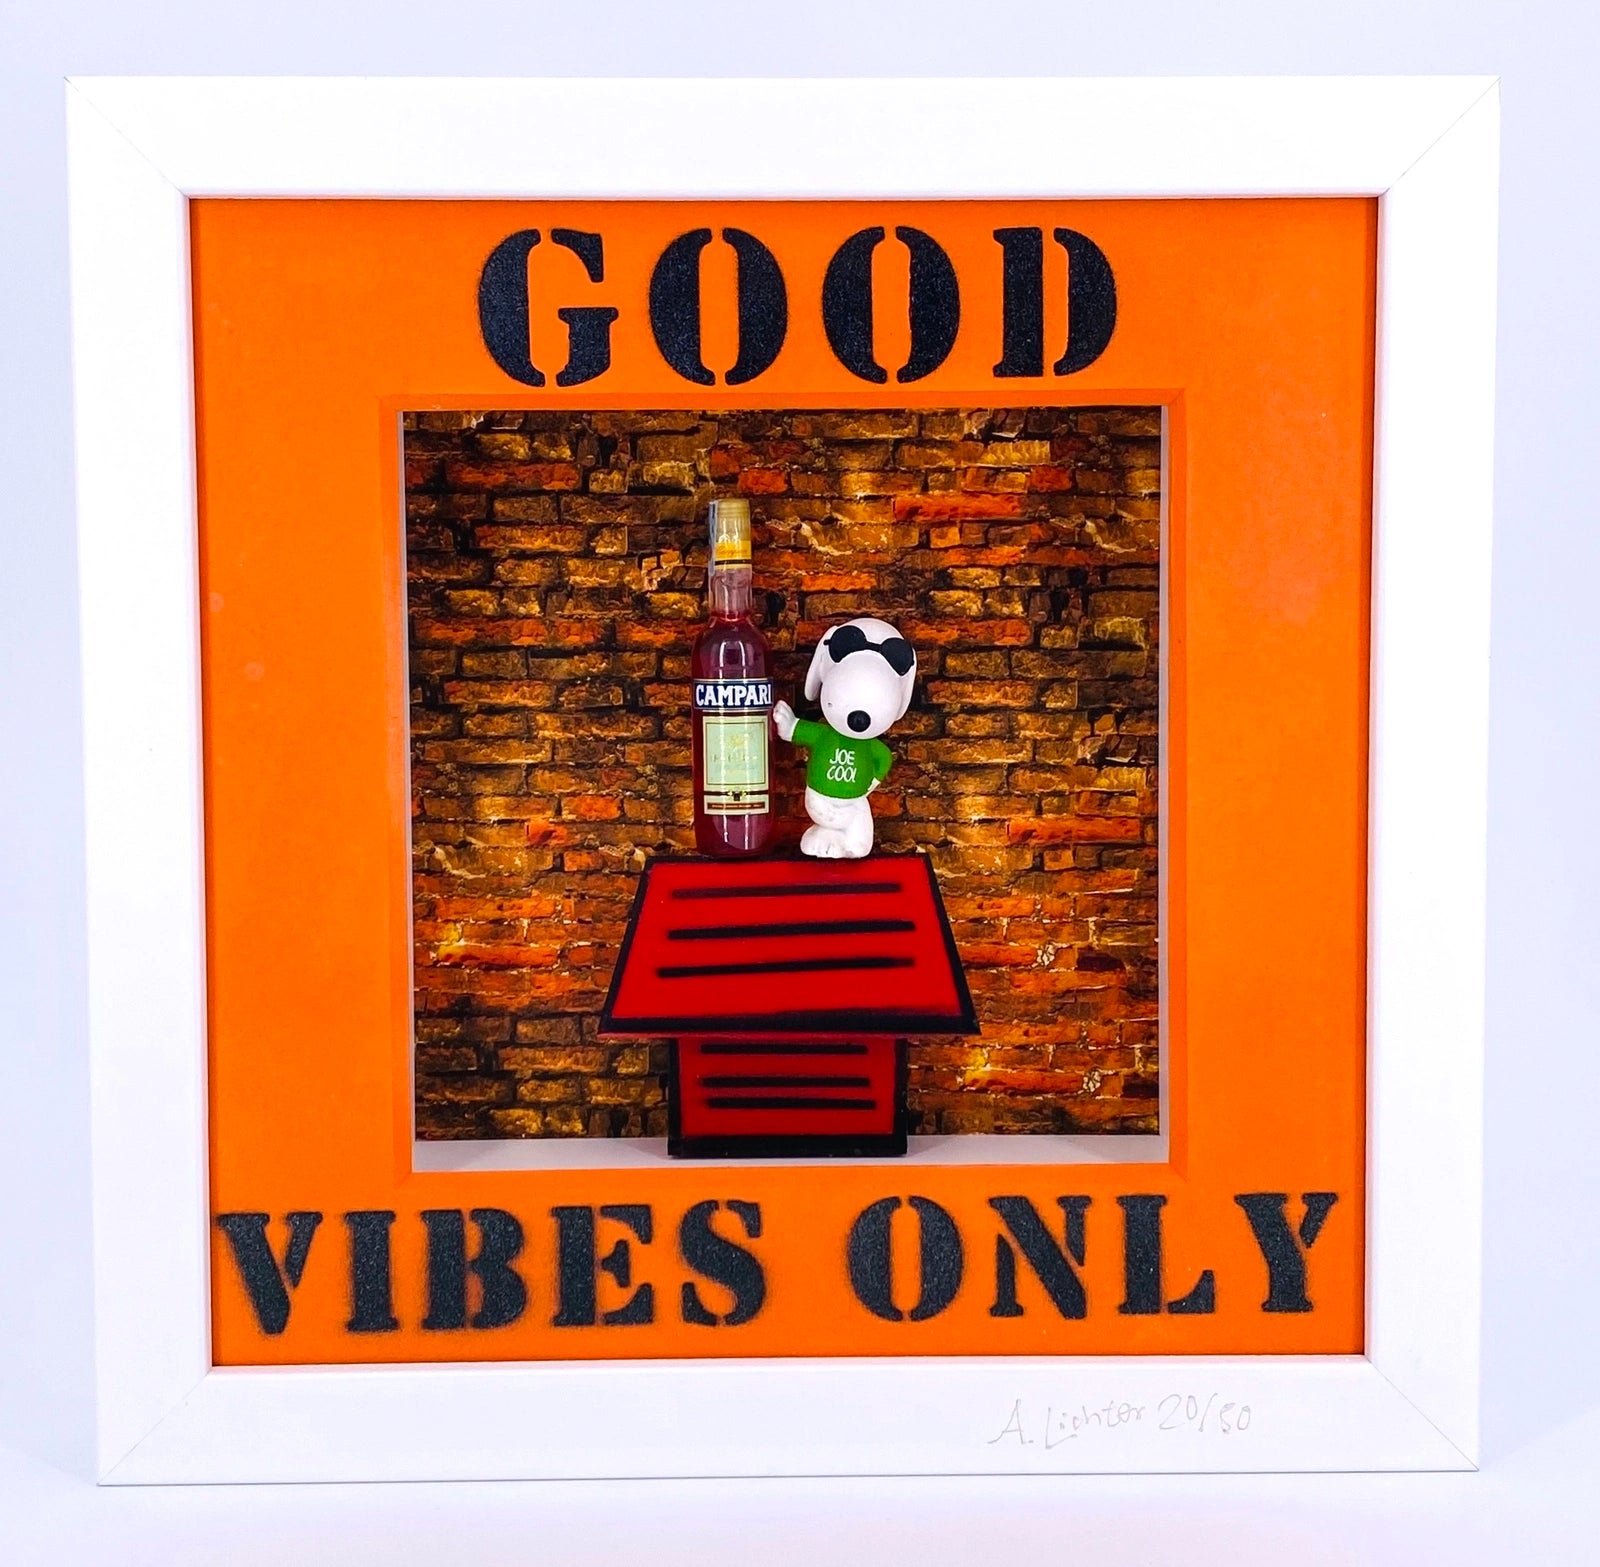 Andreas Lichter - Good Vibes only  Snoopy Campari - Galerie Vogel